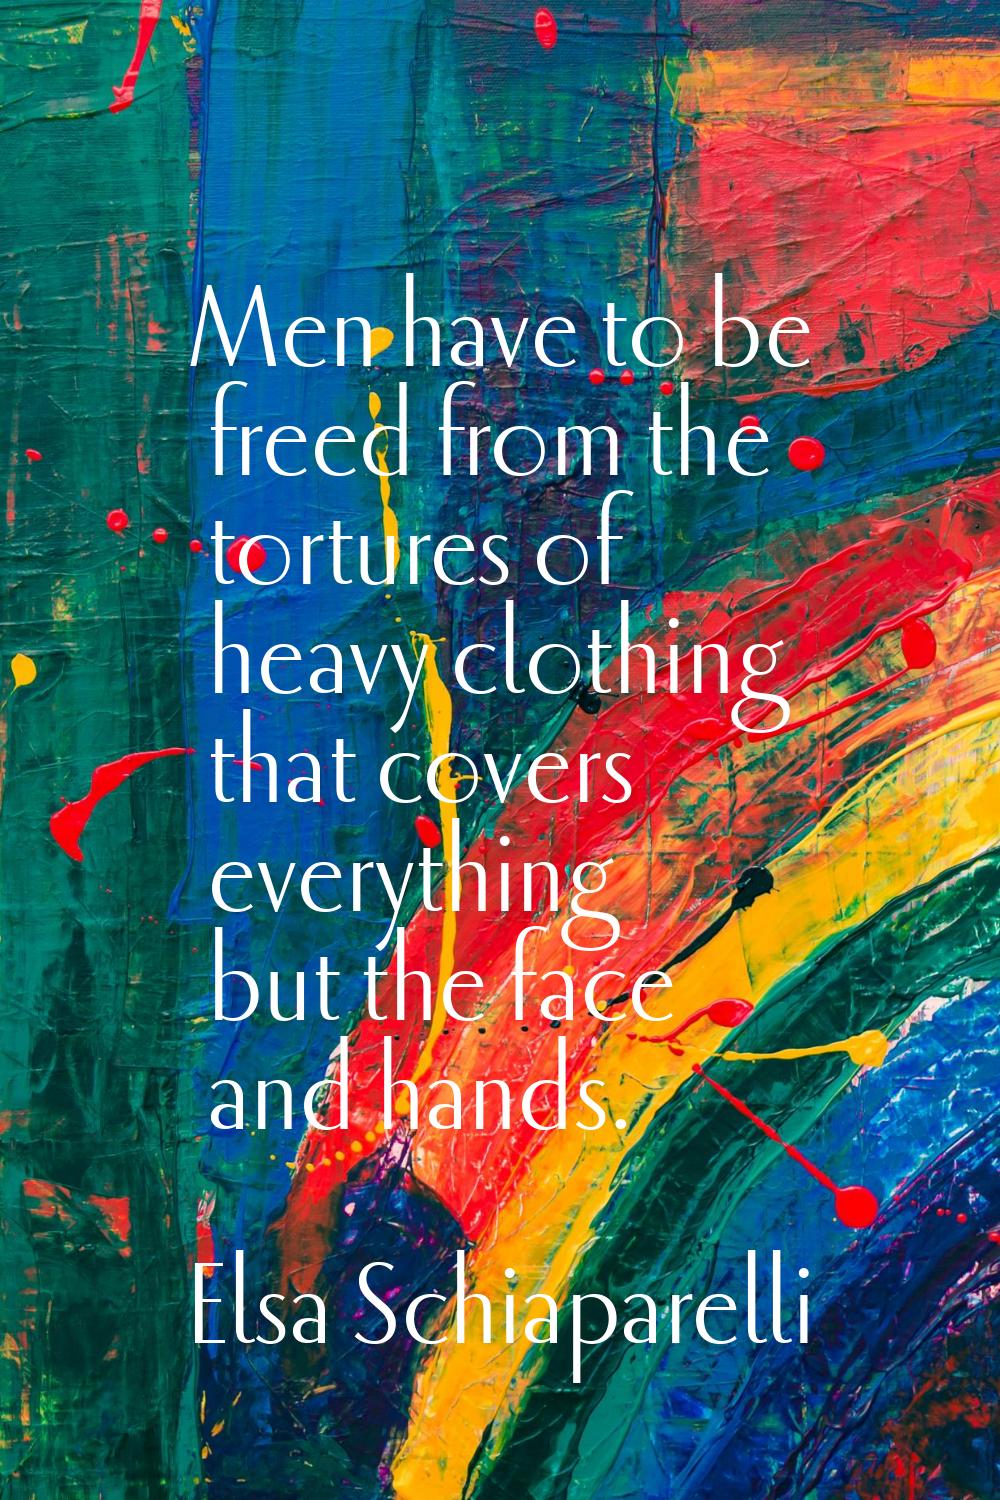 Men have to be freed from the tortures of heavy clothing that covers everything but the face and ha